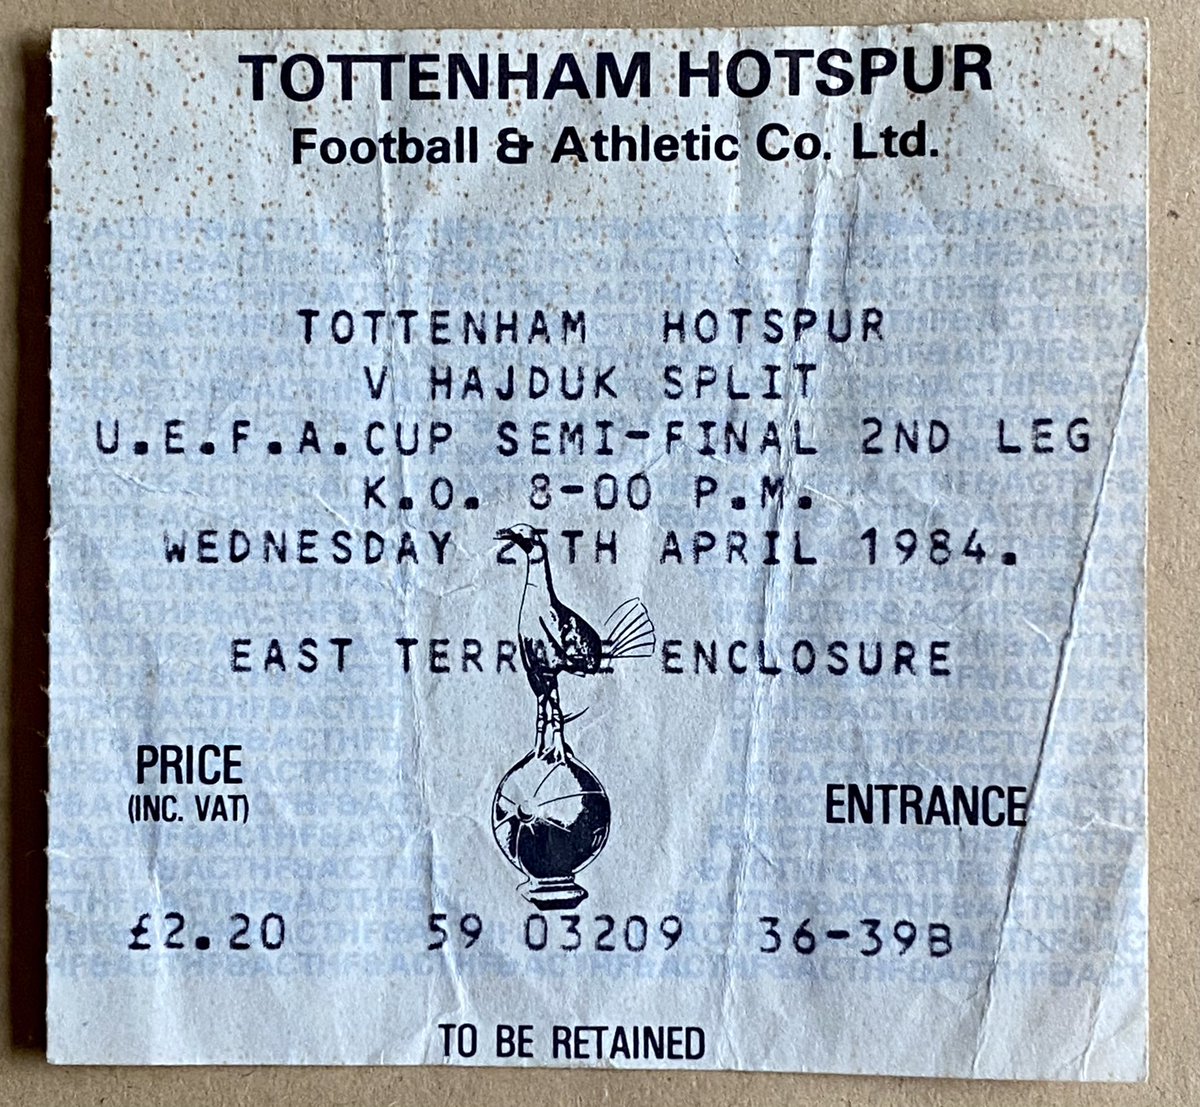 At a time when we all need a positive memory. 25 April 1984 Spurs 1 Hajduk Split 0 Attendance 43,969. White Hart Lane was in full voice as a Micky Hazard goal saw Spurs qualify for the UEFA Cup Final. Brussels here we come in our thousands. https://t.co/Myl0V5WuzR